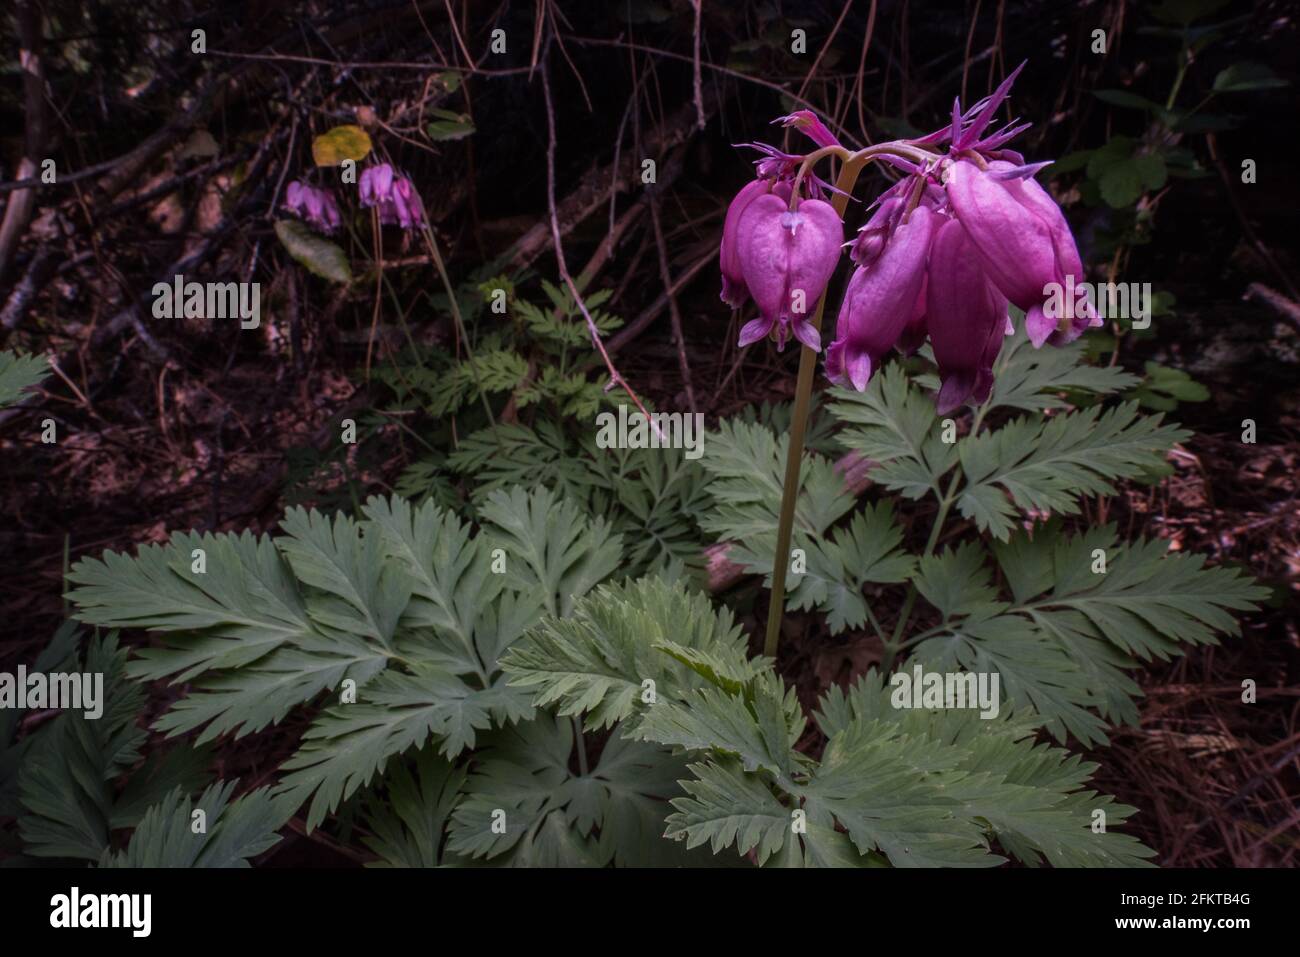 Pacific Bleeding Heart (Dicentra formosa) a wildlfower native to California and western North America. Stock Photo